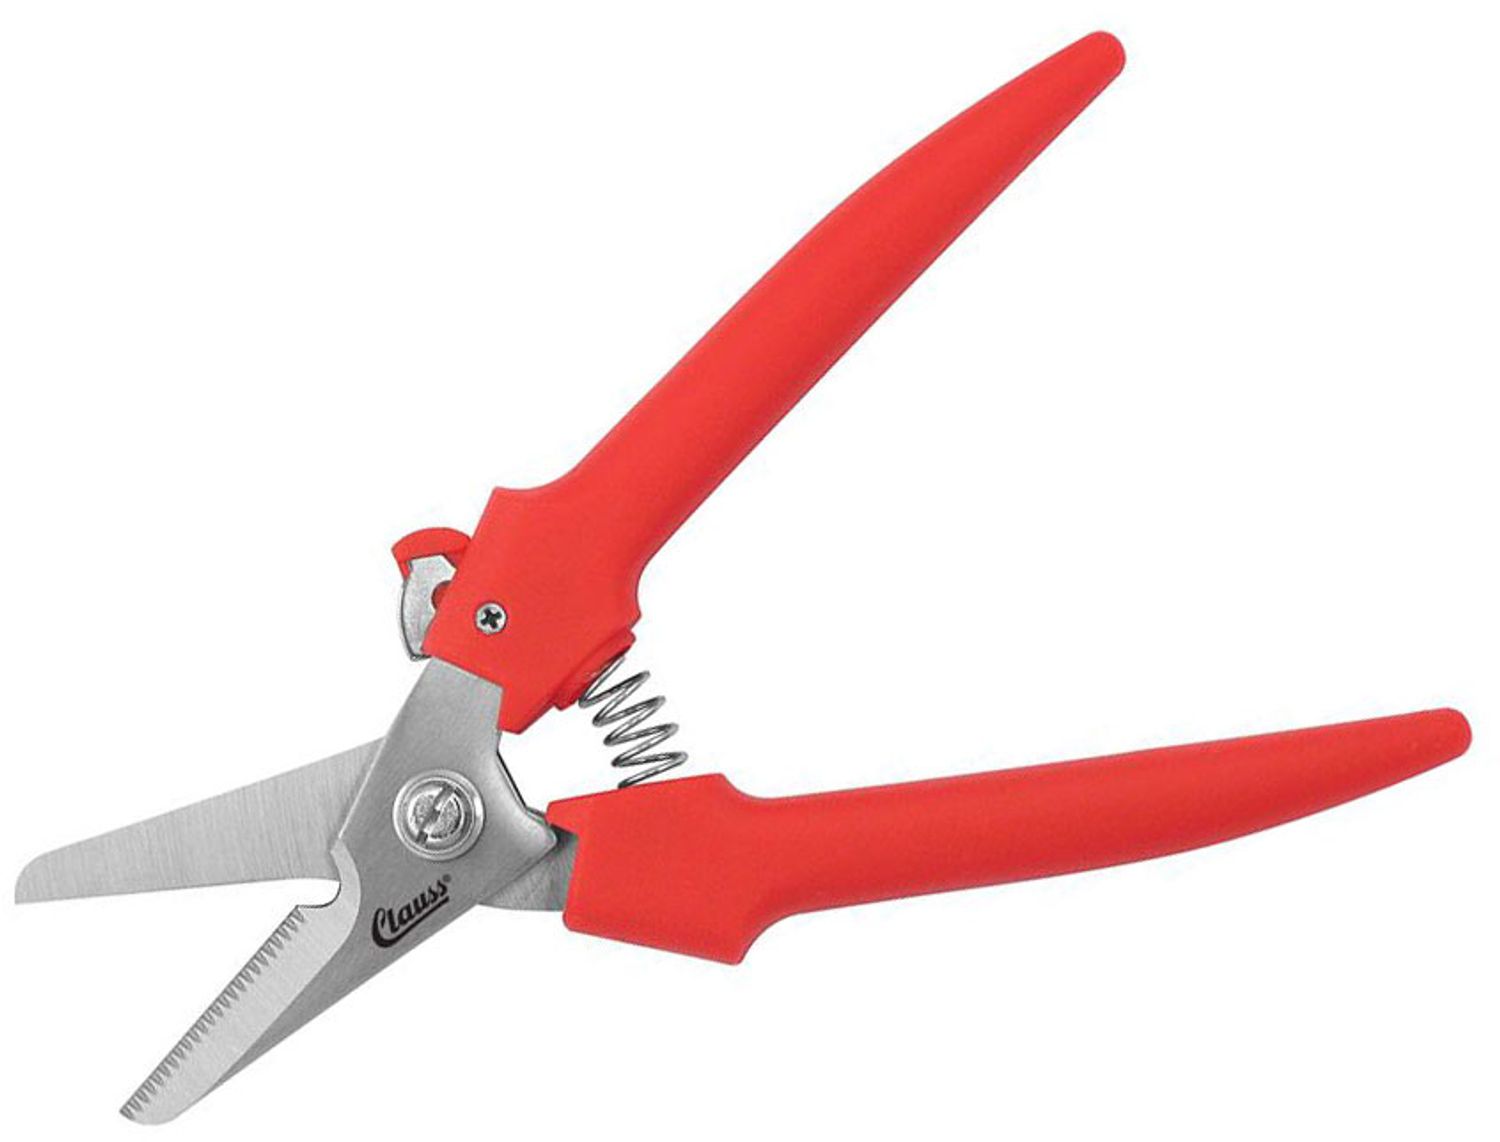 Clauss 33403 6in Floral Cutter With Lanyard Nippers Snips for sale online 